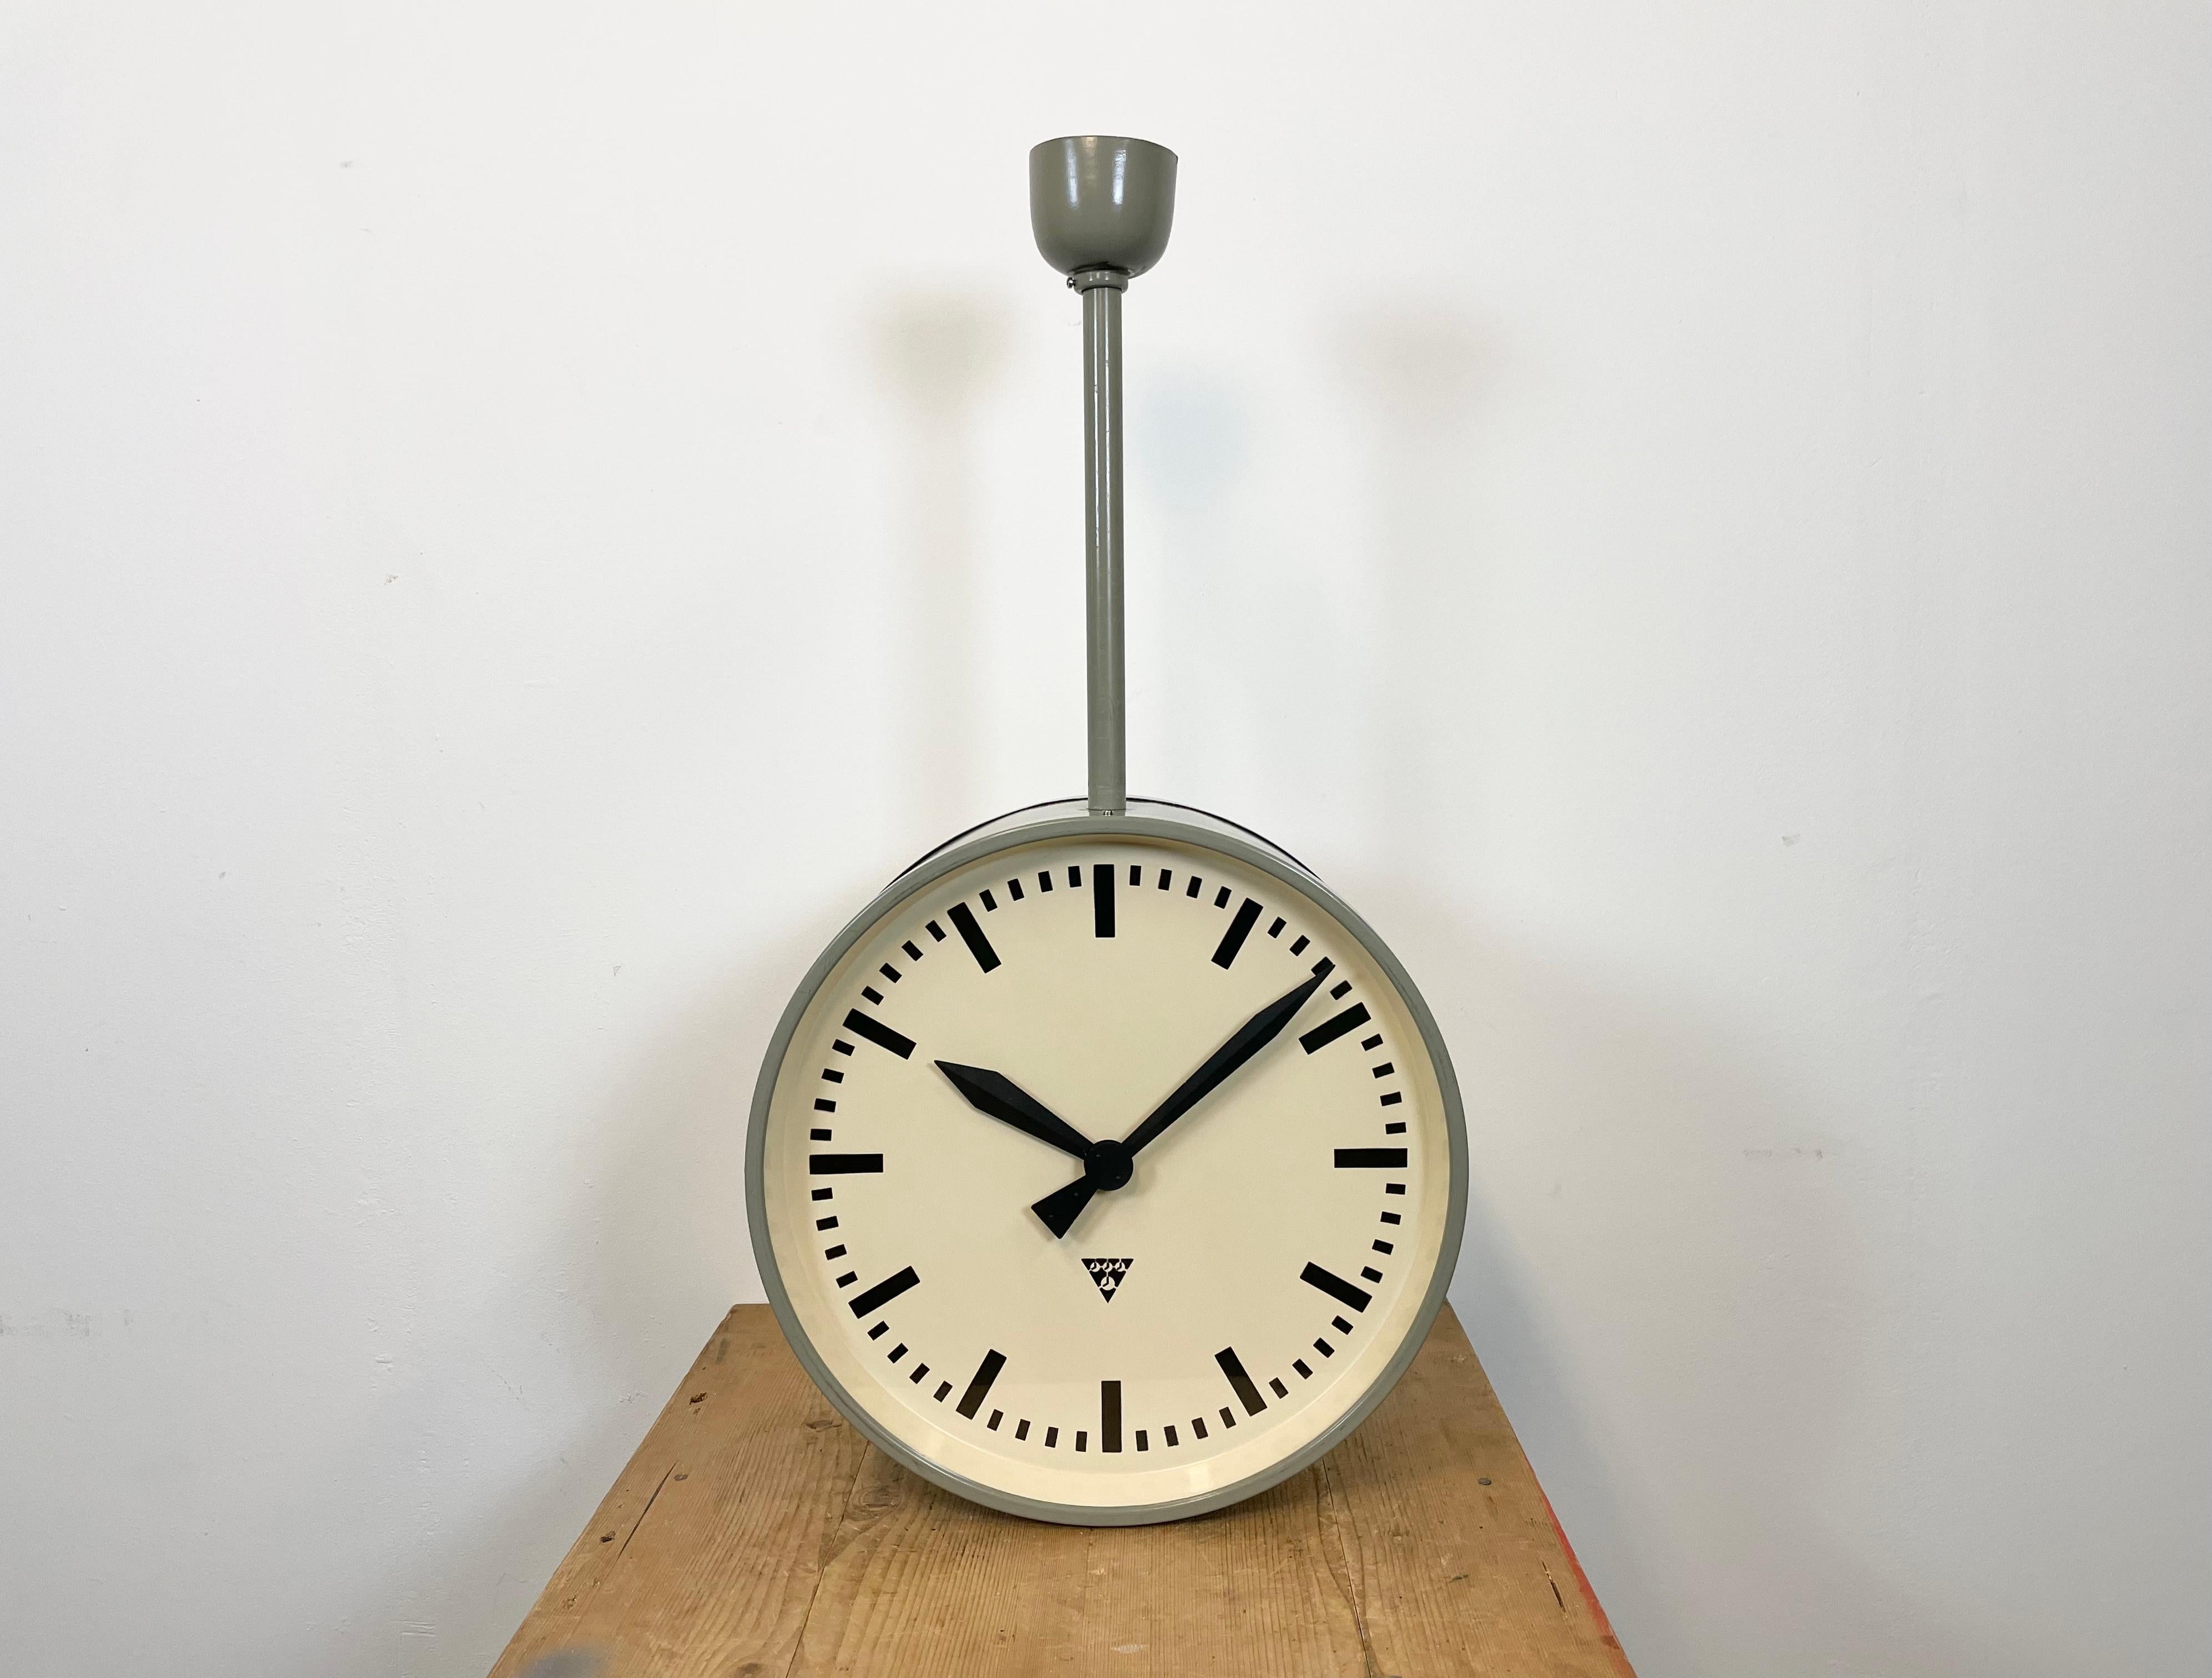 This large double-sided railway or factory clock was produced by Pragotron, in former Czechoslovakia, during the 1950s. The piece features a grey metal body and a clear glass cover. The clock has been converted into a battery-powered clockwork and